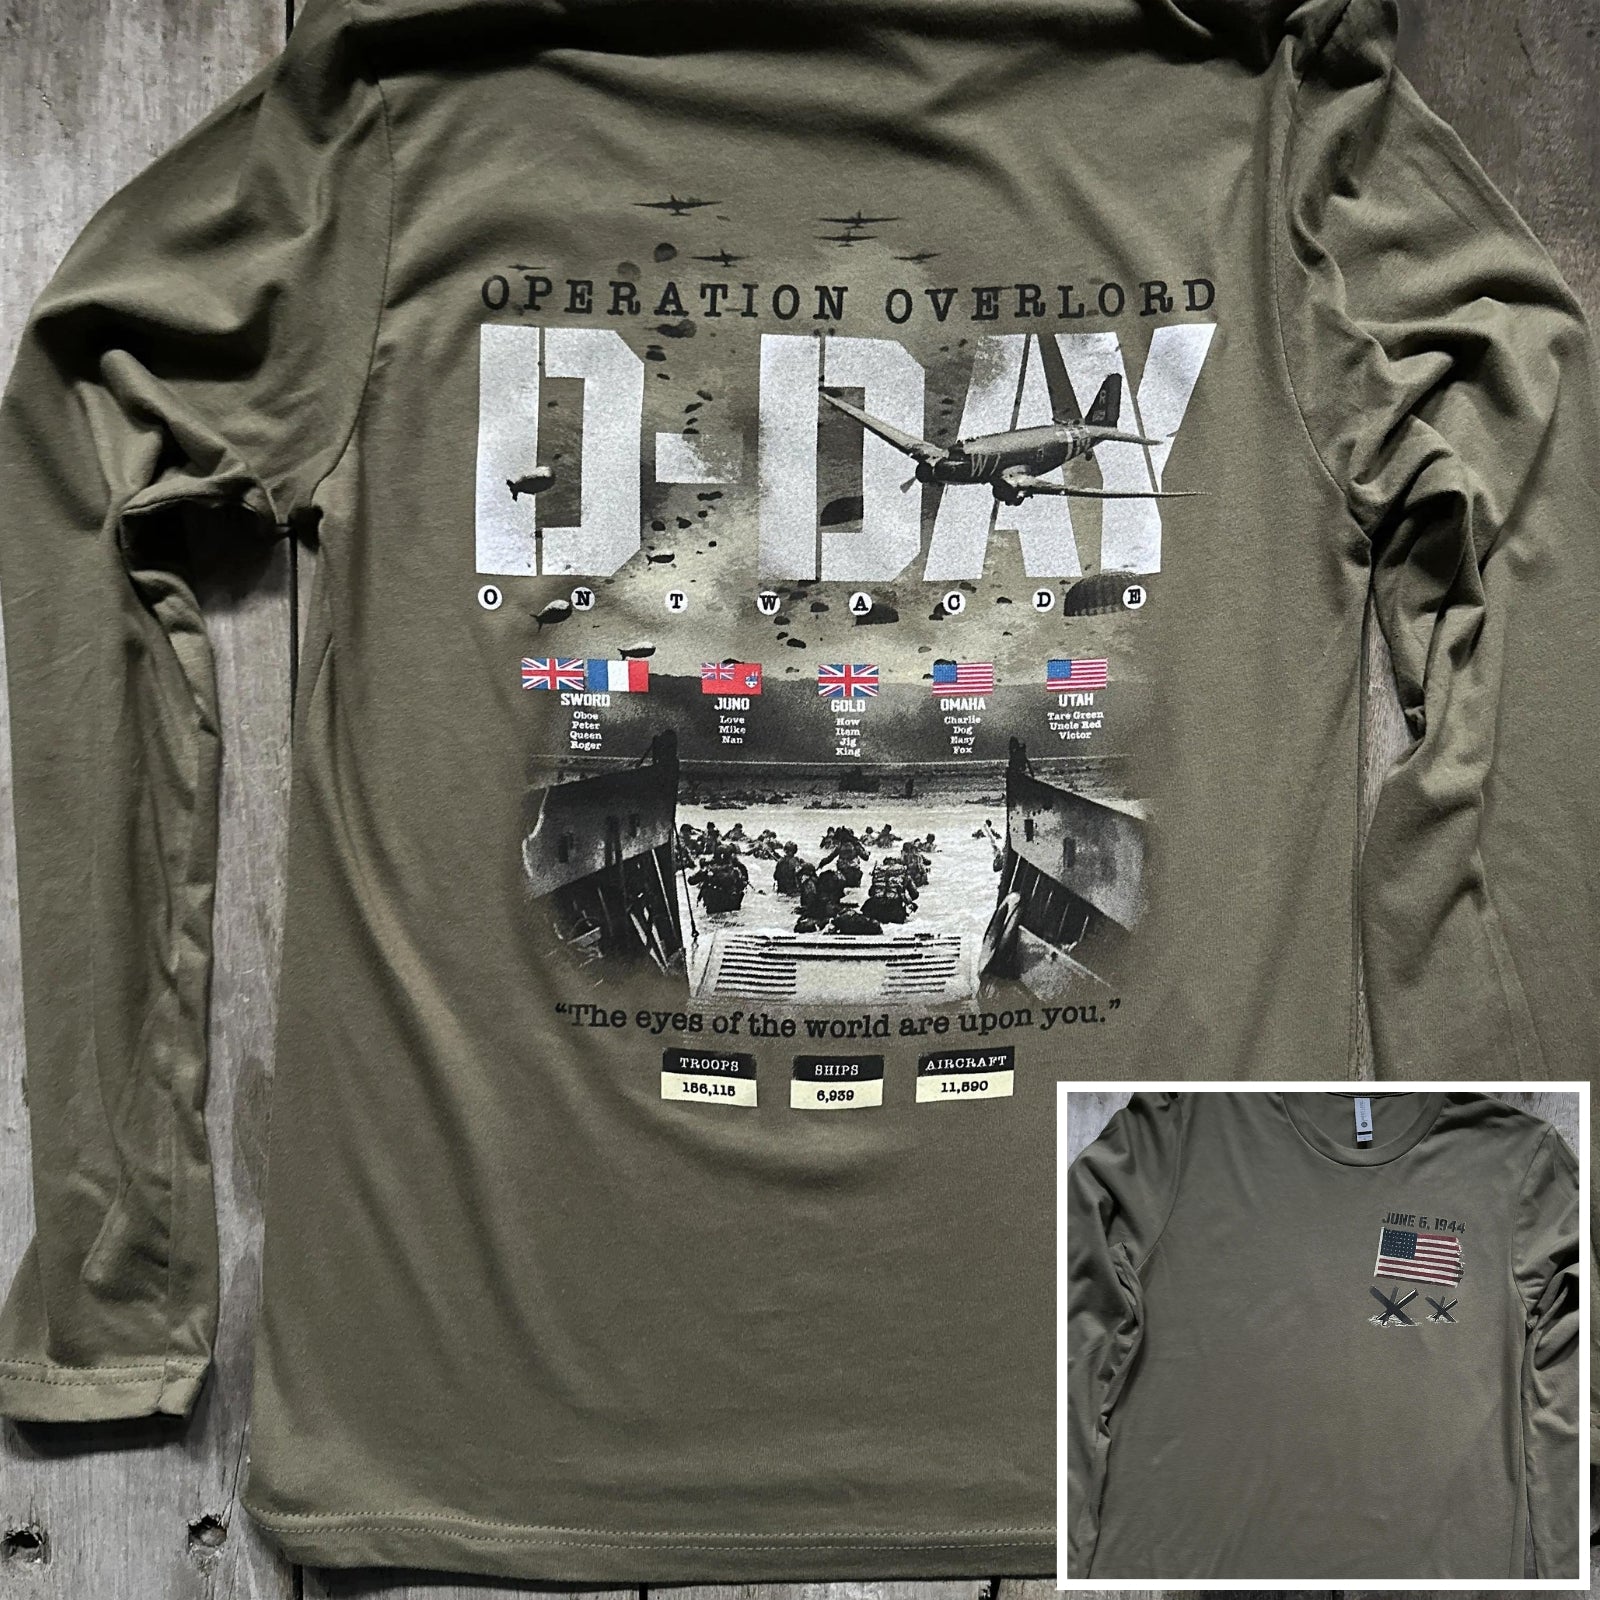 D-Day Operation Overlord Long-sleeved shirt from The History List store